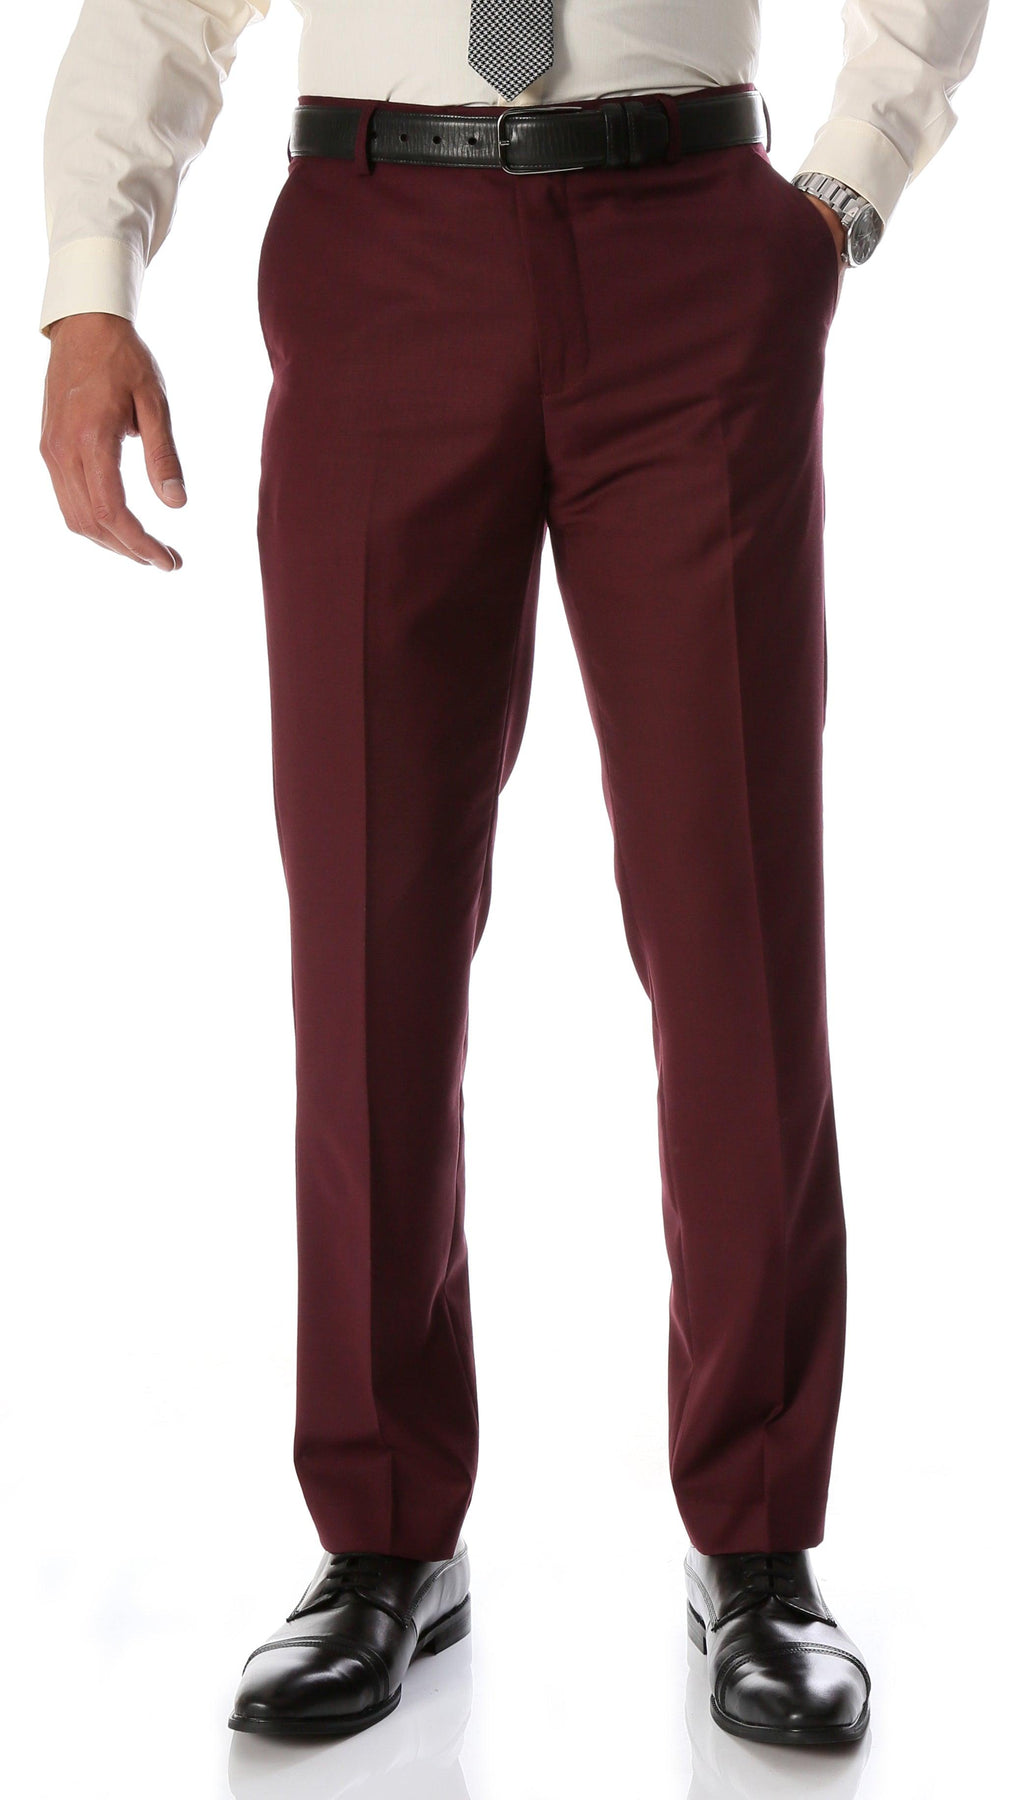 Burgundy ~ Maroon ~ Wine Color Stage Party Pants Trousers Fl